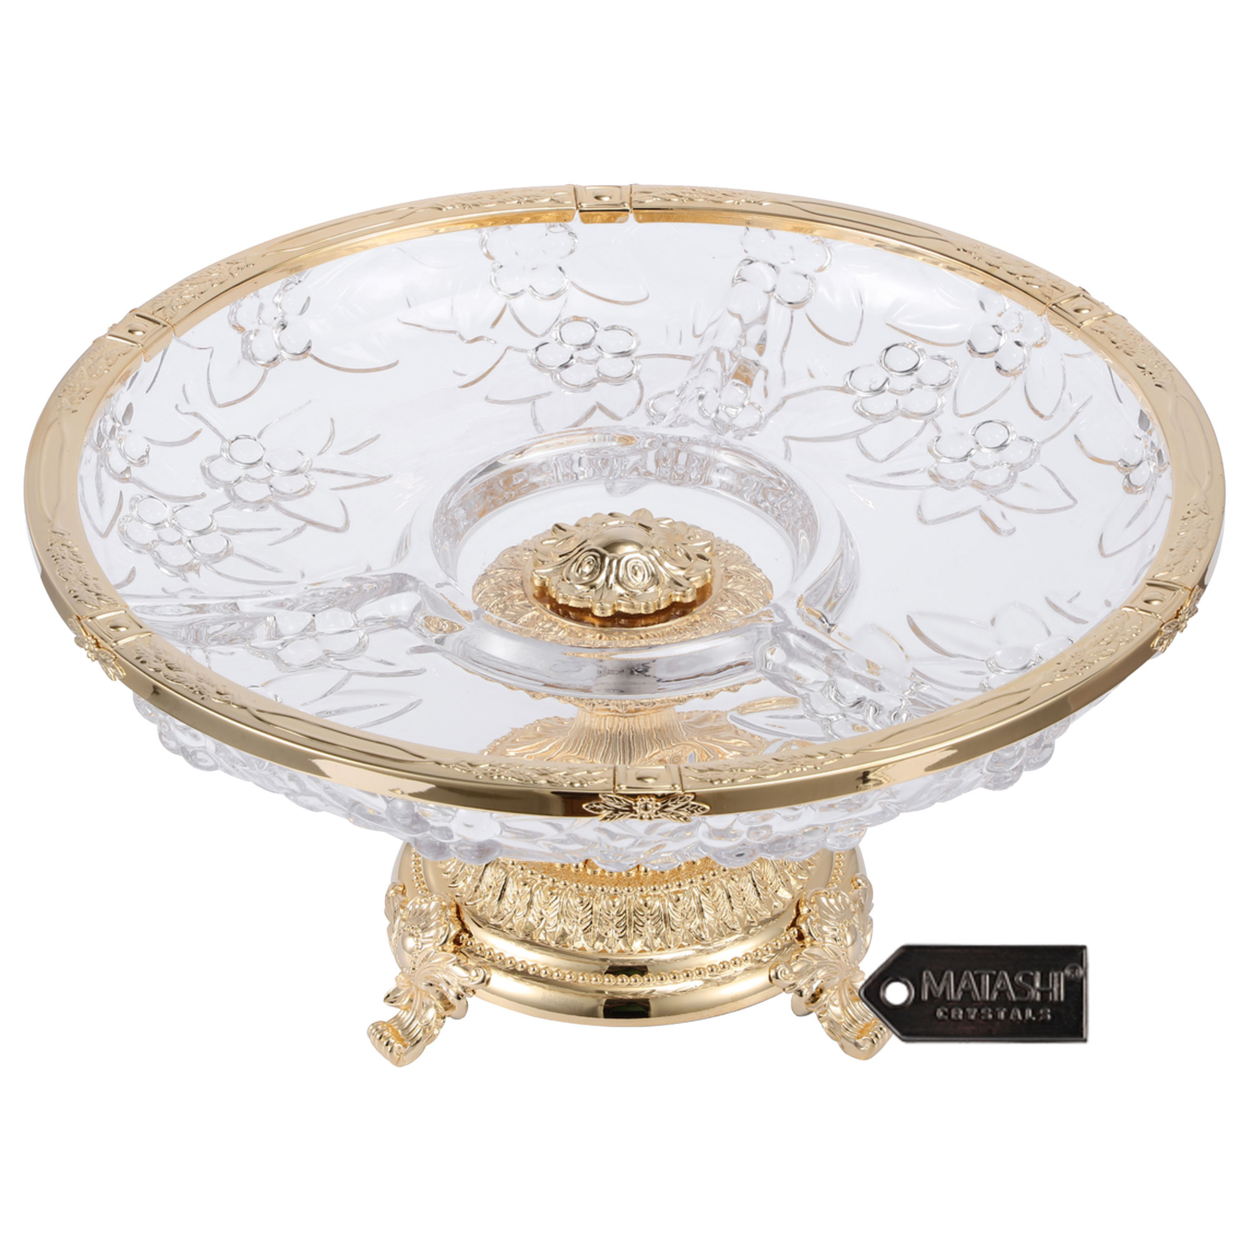 Matashi 3 Sectional Compote Centerpiece Decorative Bowl, Round Serving Platter W 24K Gold Plated Pedestal Base For Weddings Parties Tabletop